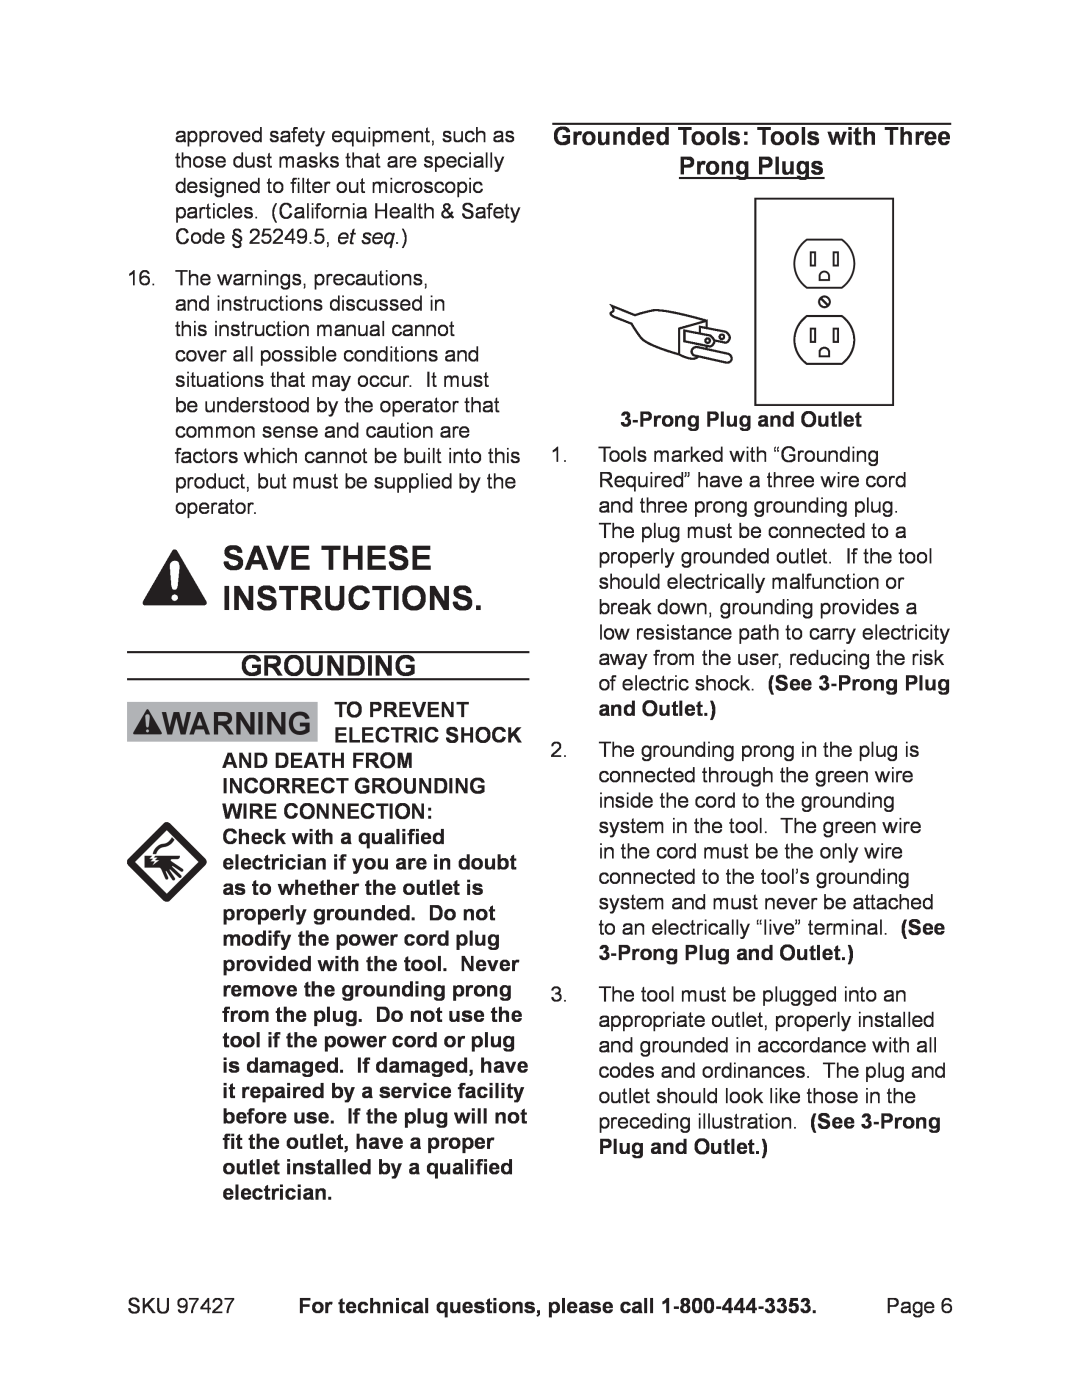 Chicago Electric 97427 Save these instructions, Grounding, Grounded Tools Tools with Three Prong Plugs, Plug and Outlet 